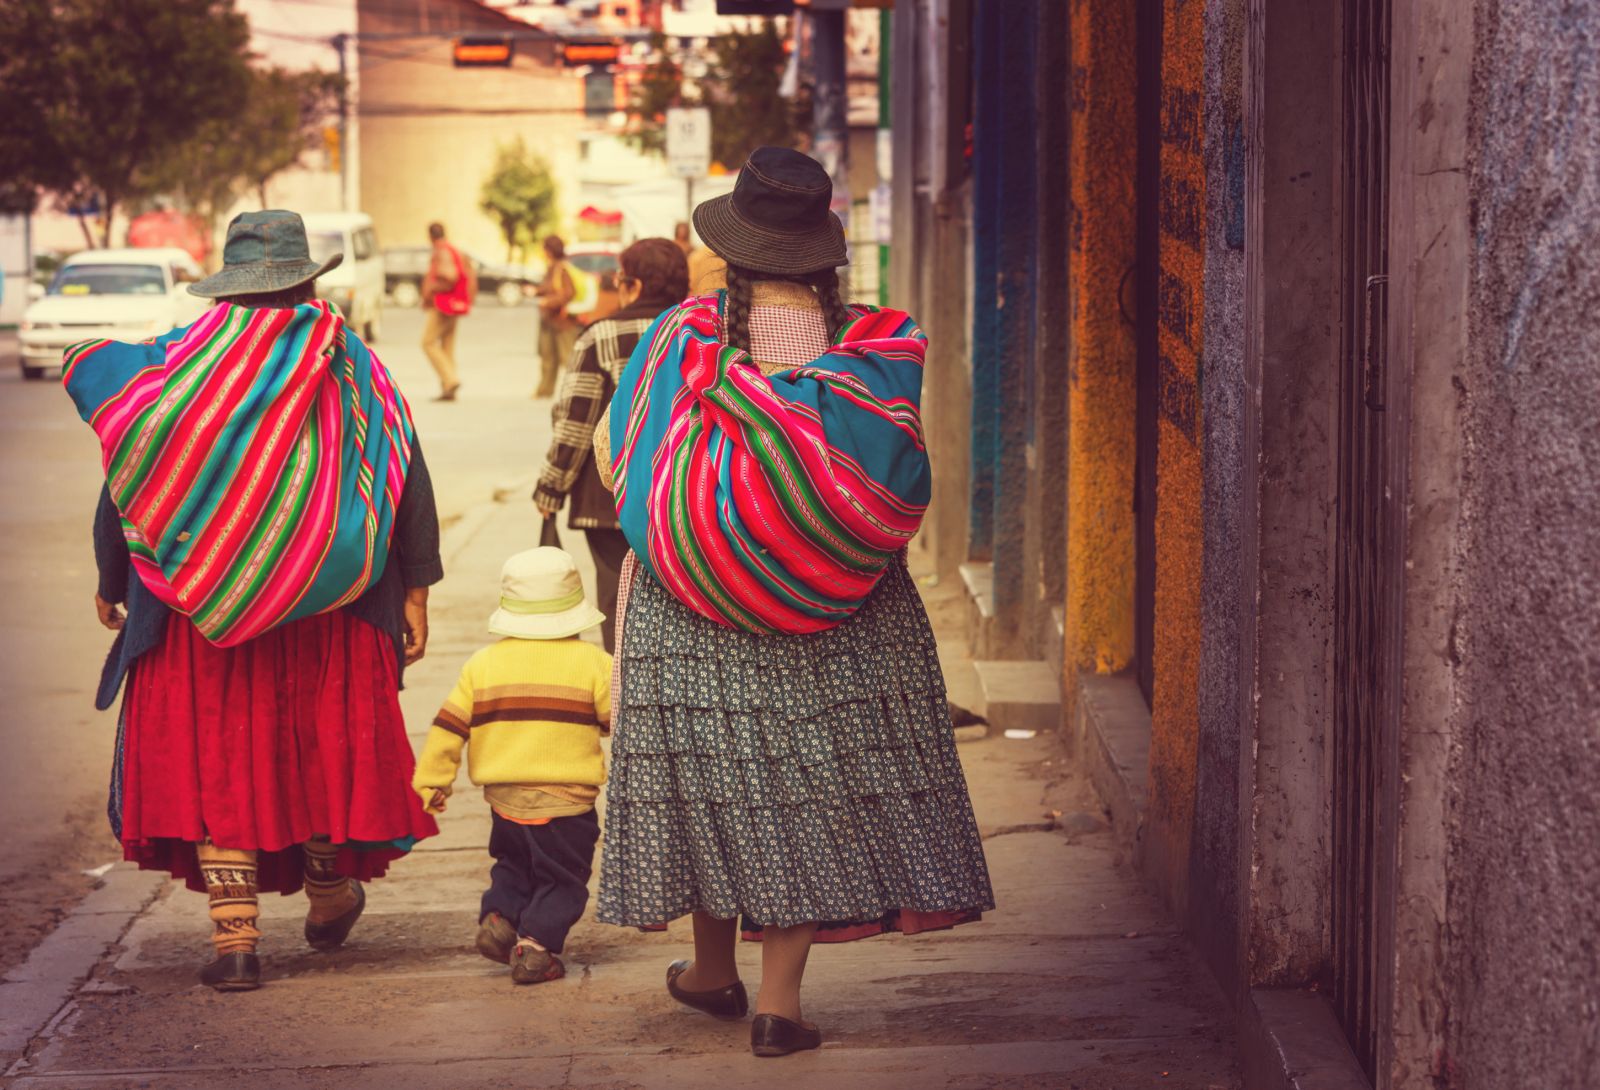 Two women carrying belongings in coloured blankets on their backs walking down the street in Boliva with a small child in between them